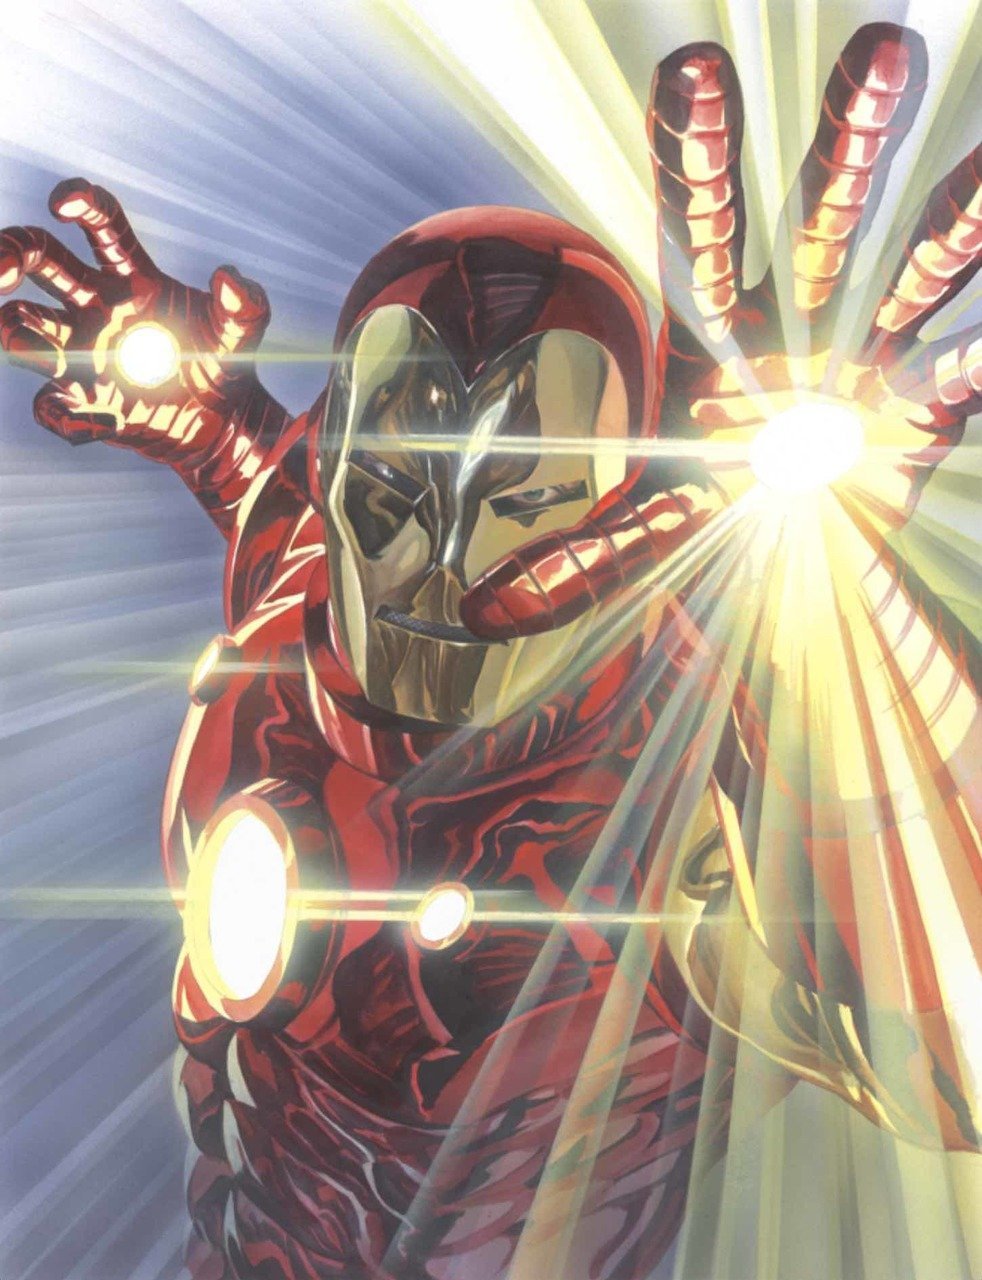 Iron-Man shots his rays from the palms of his gauntlets.